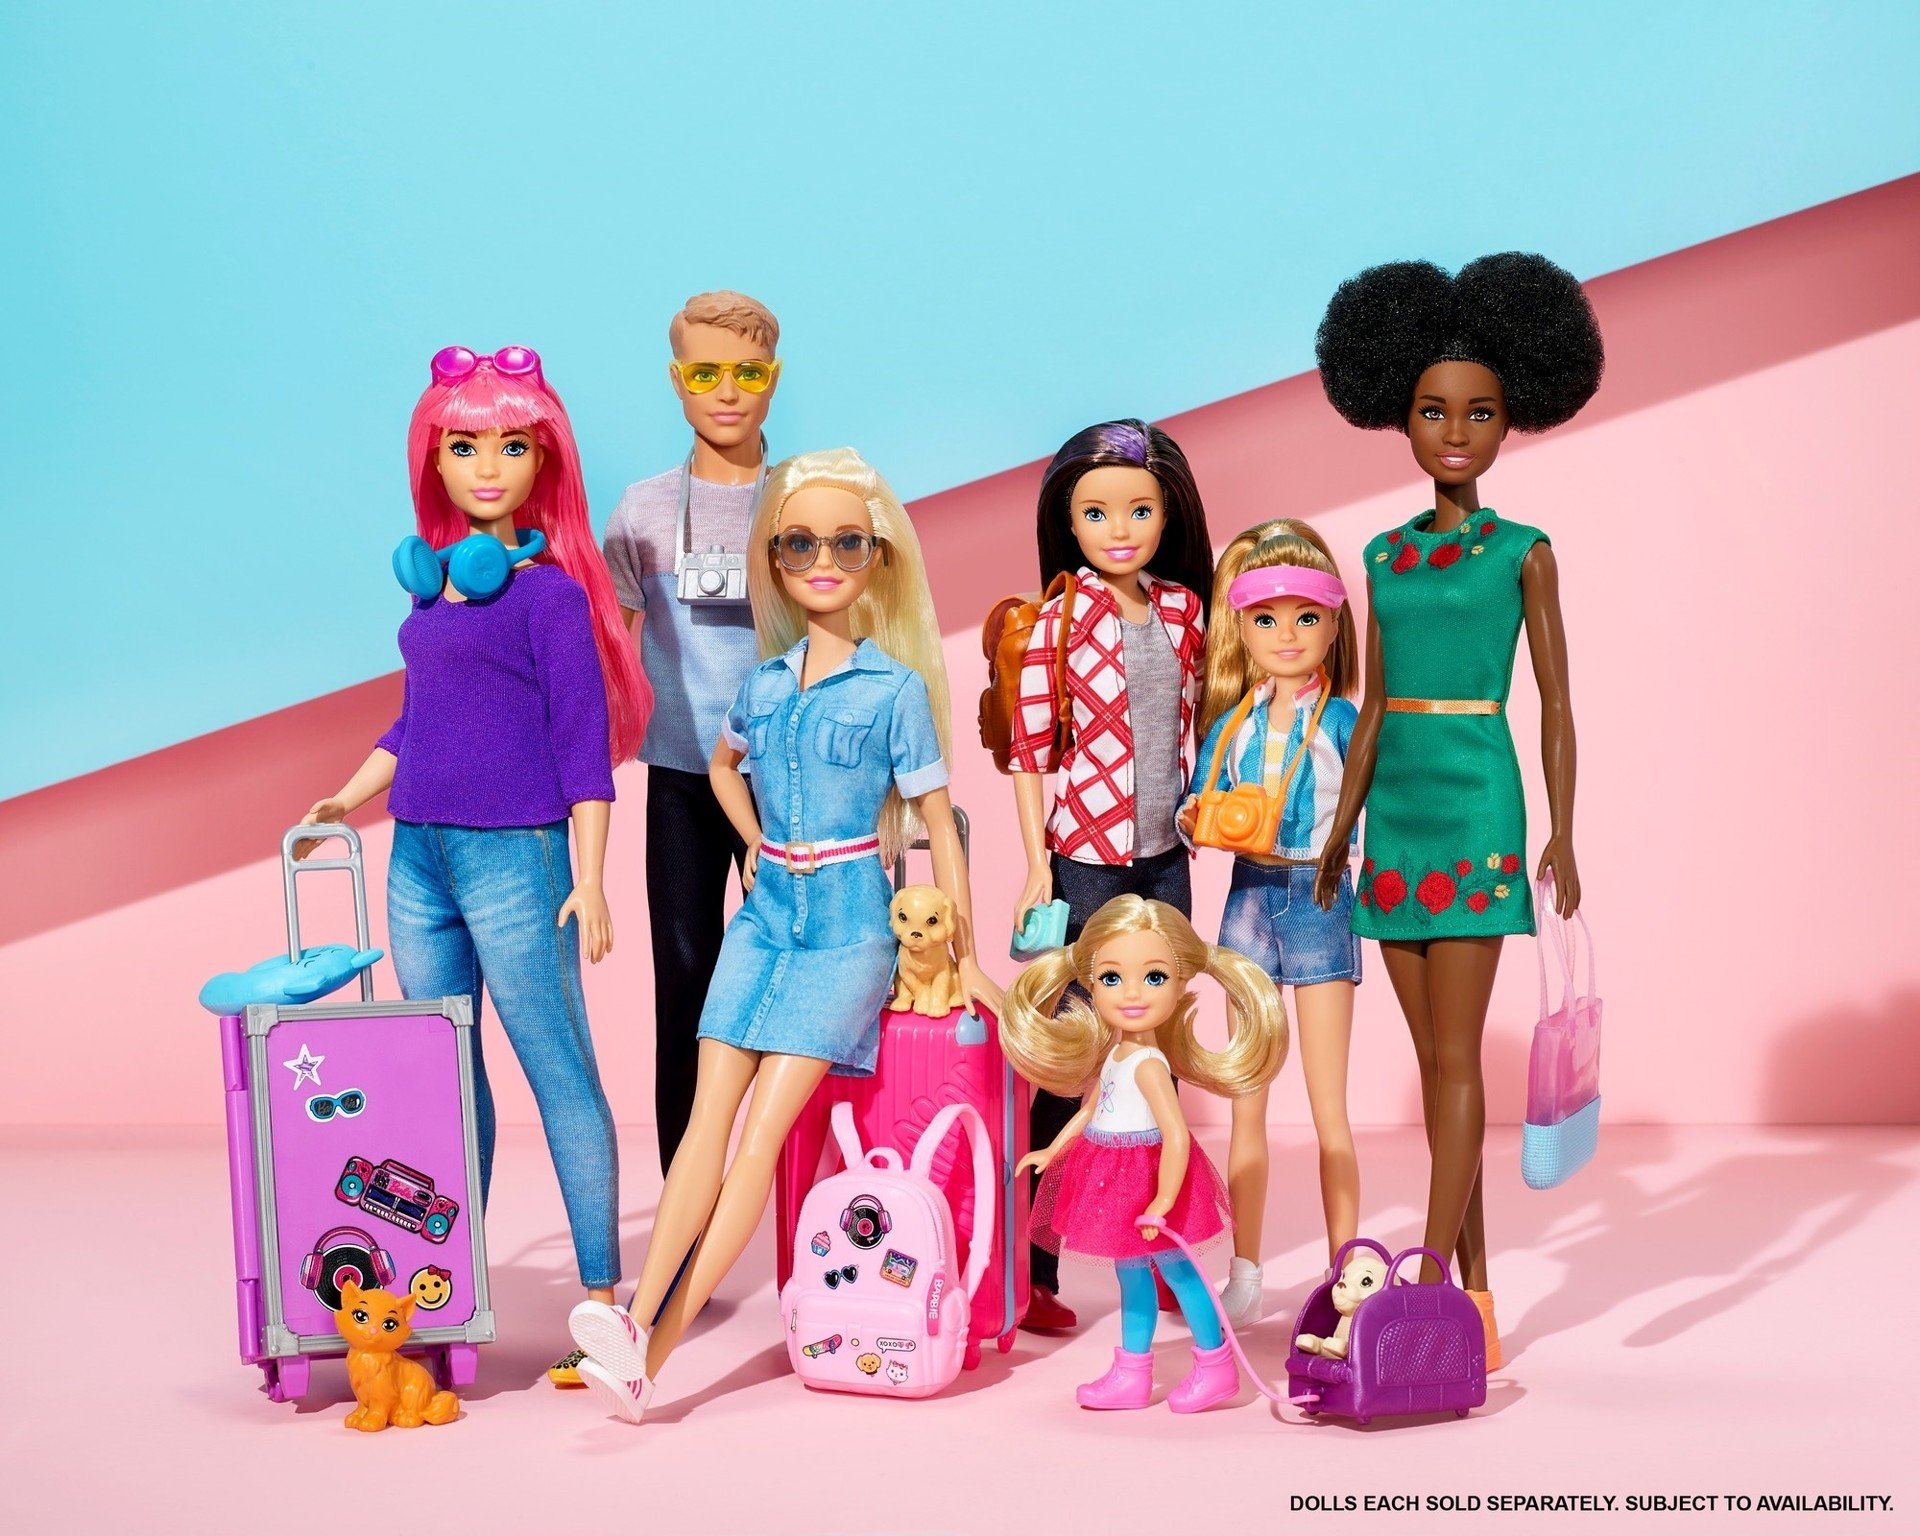 Barbie Travel Doll, Blonde, with Puppy, Opening Suitcase, Stickers and 10+ Accessories, for 3 to 7 Year Olds - wide 2